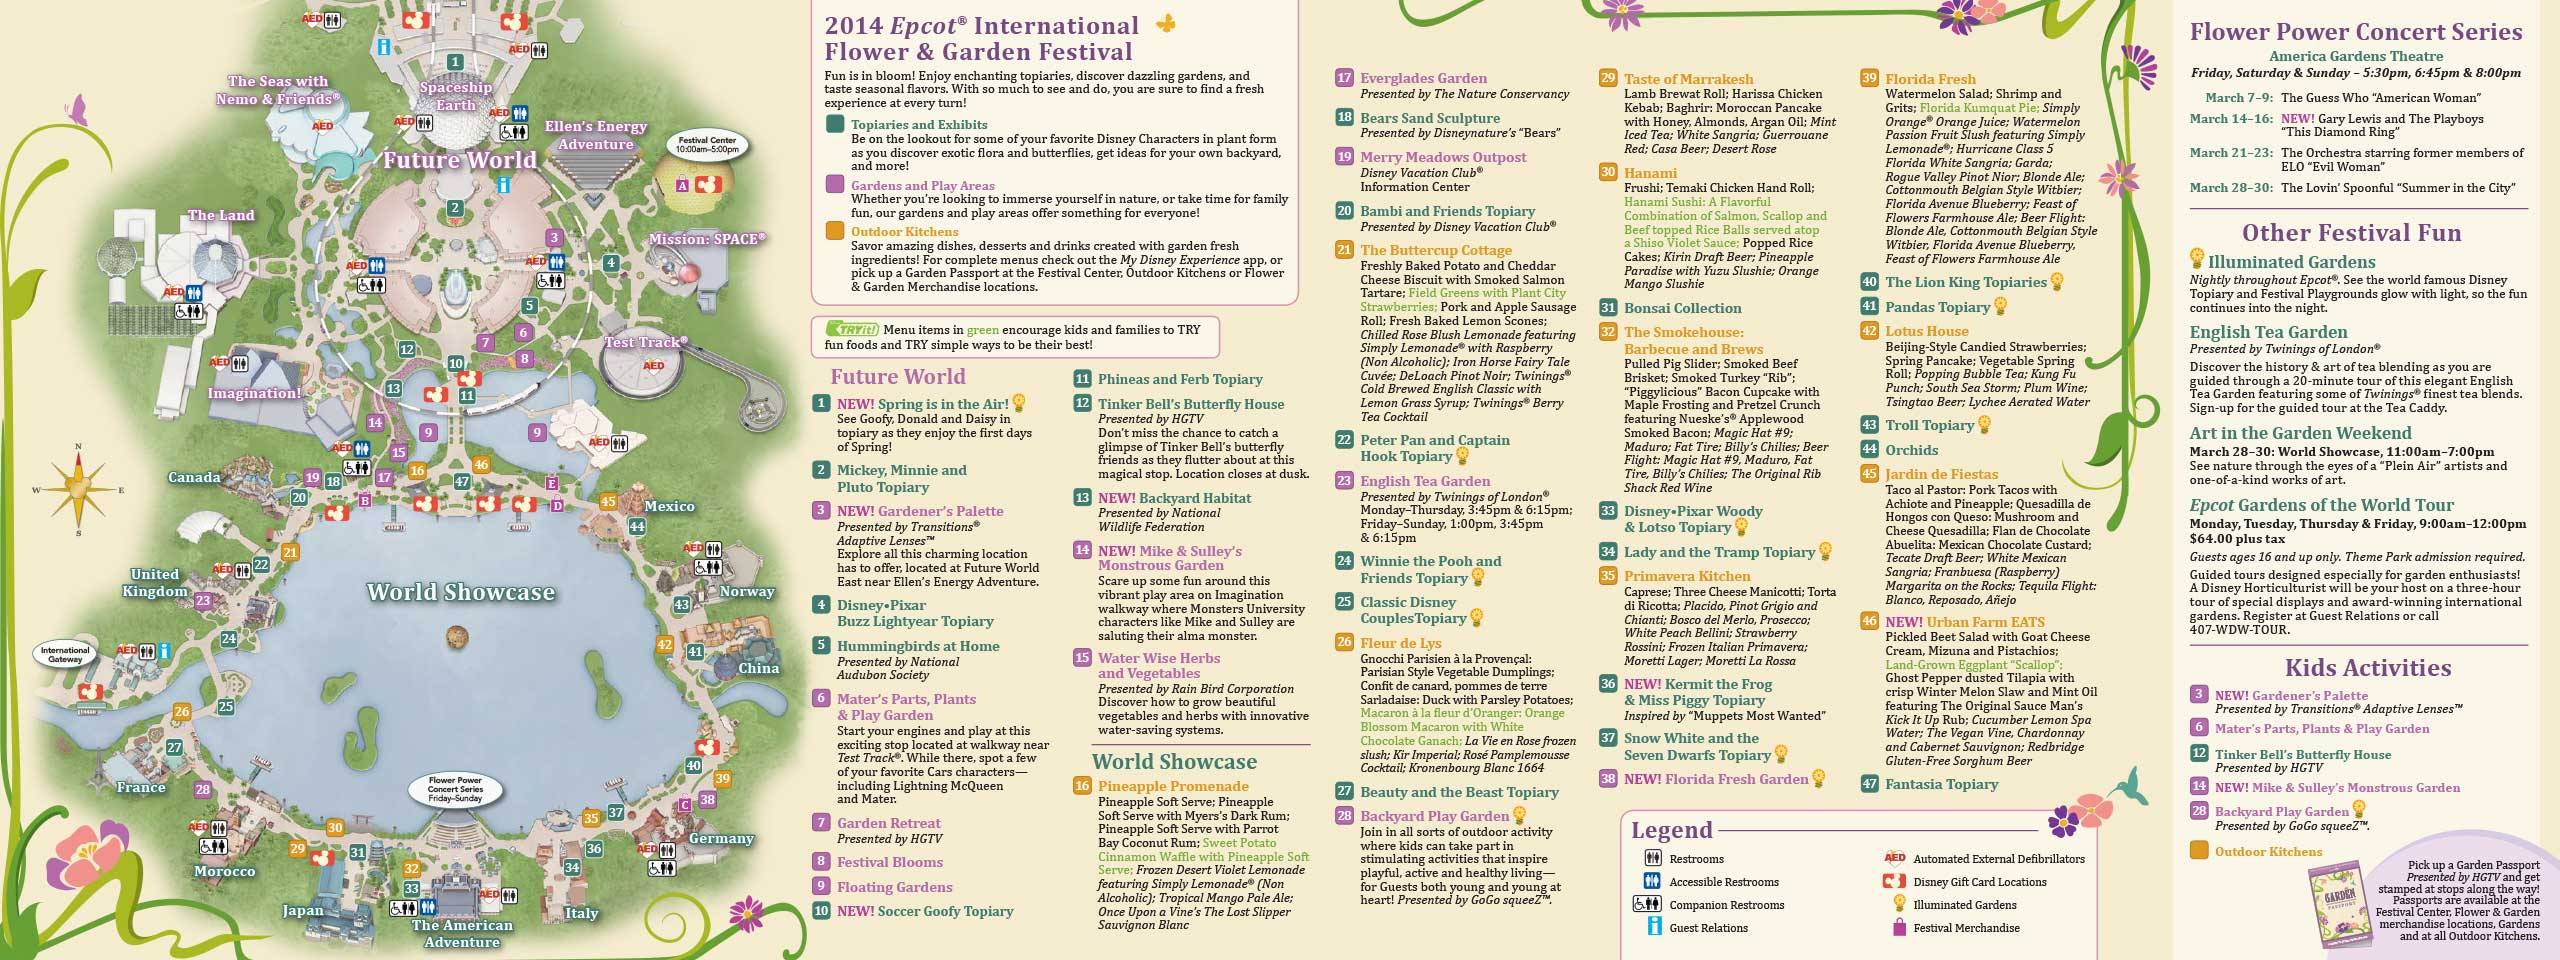 2014 Epcot Flower and Garden Festival guide map